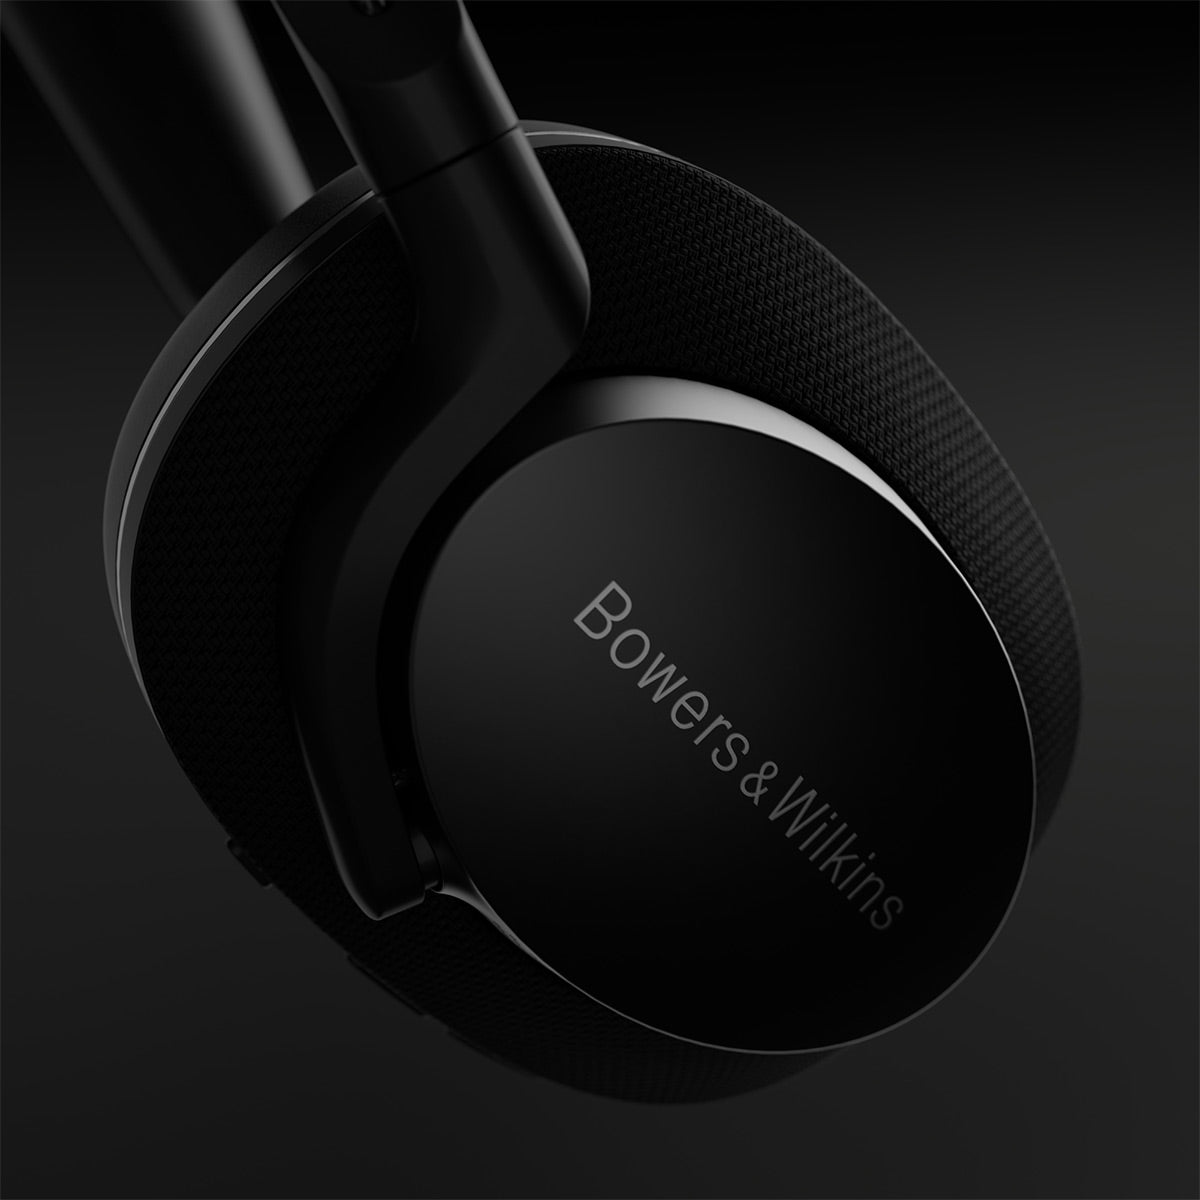 Bowers & Wilkins PX7 S2e Over-Ear Noise-Canceling Wireless Headphones - Anthracite Black